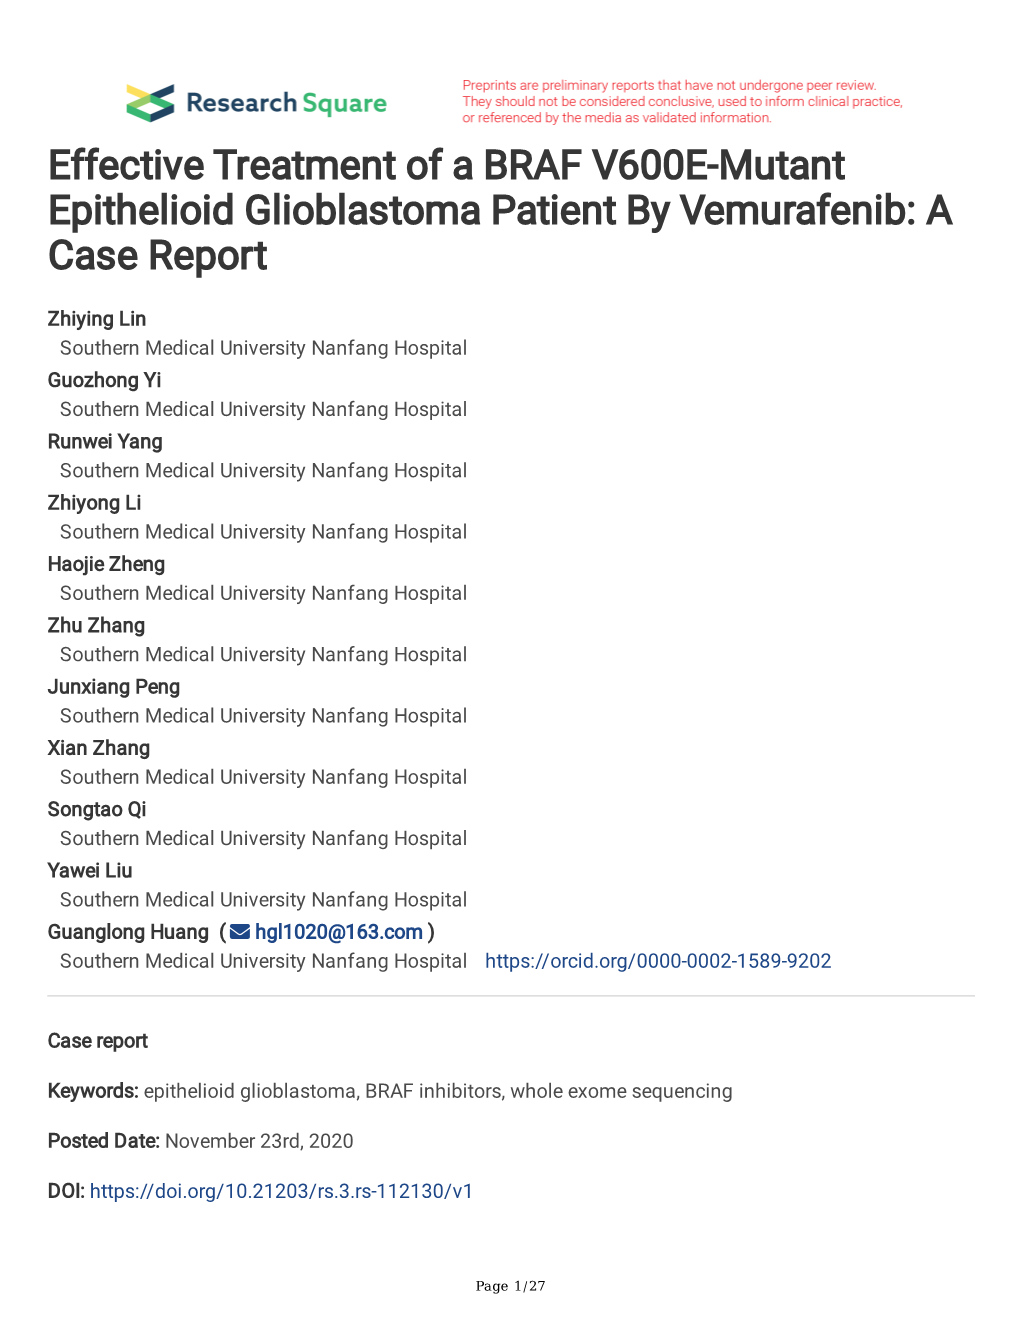 Effective Treatment of a BRAF V600E-Mutant Epithelioid Glioblastoma Patient by Vemurafenib: a Case Report